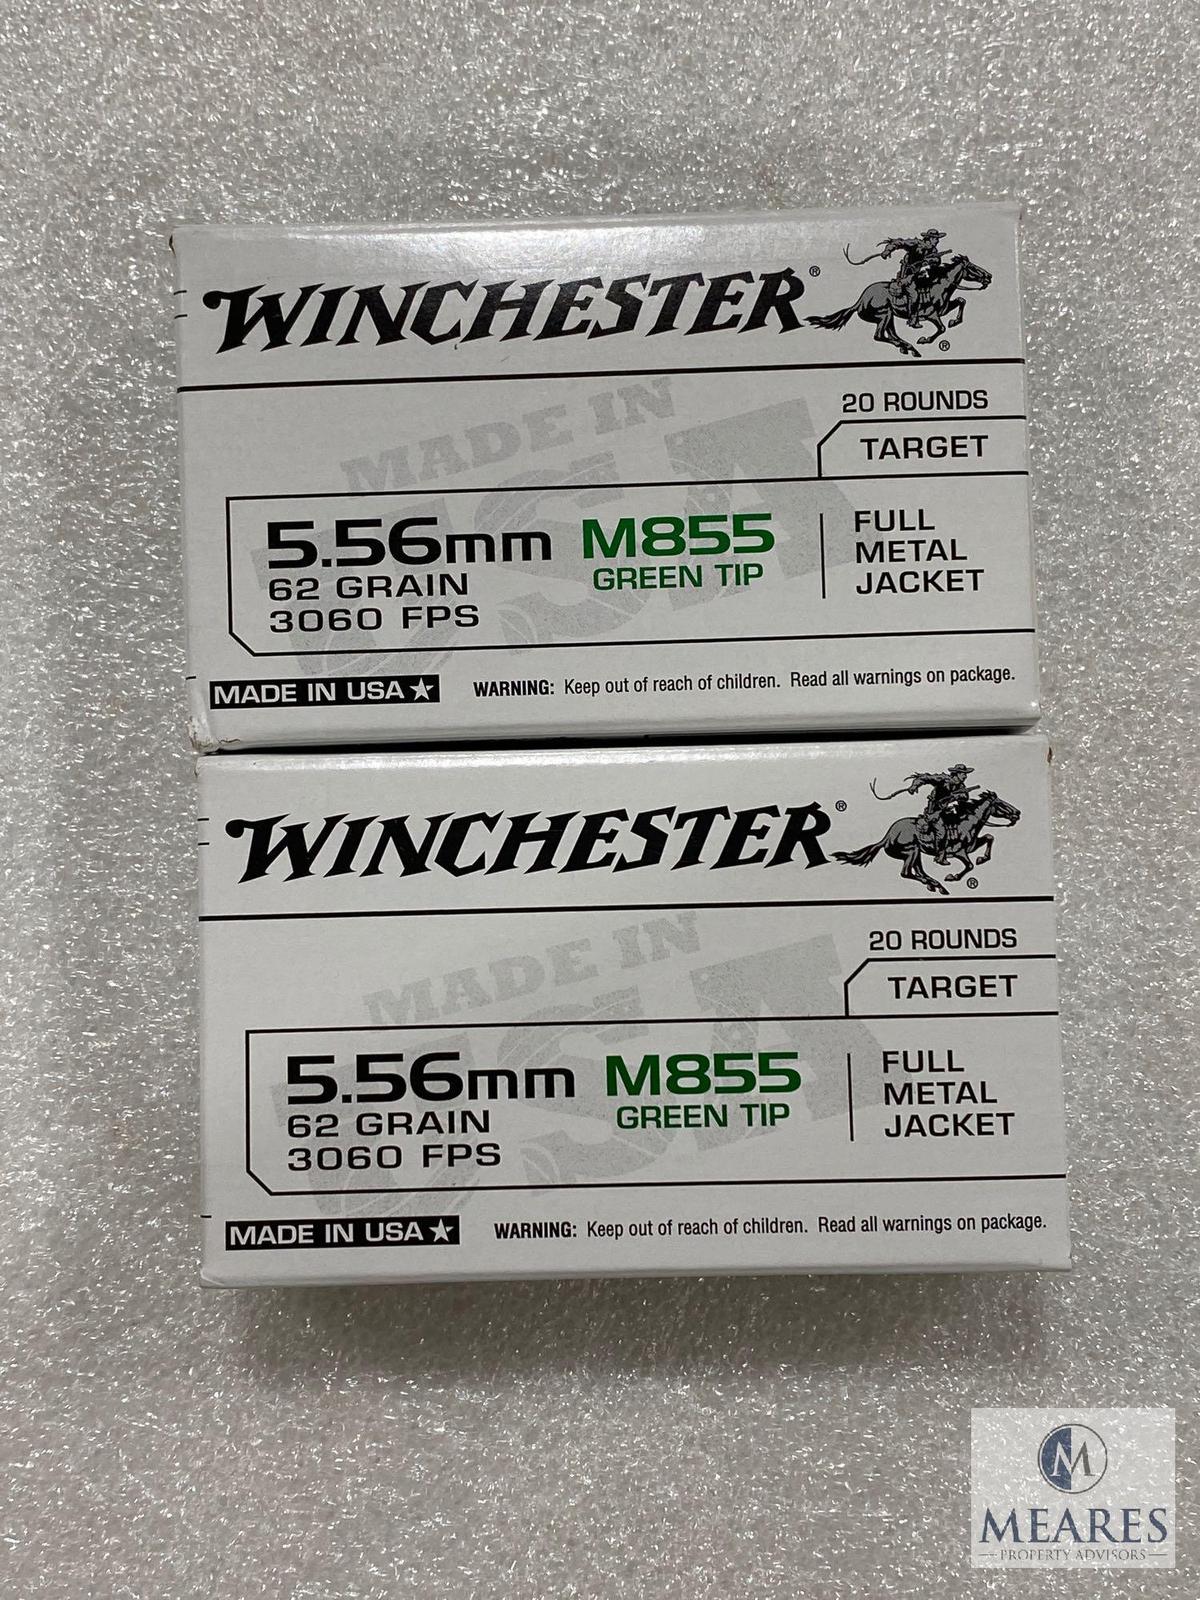 40 Rounds Winchester 5.56mm M855 Green Tip 62 Grain 3060 FPS FMJ